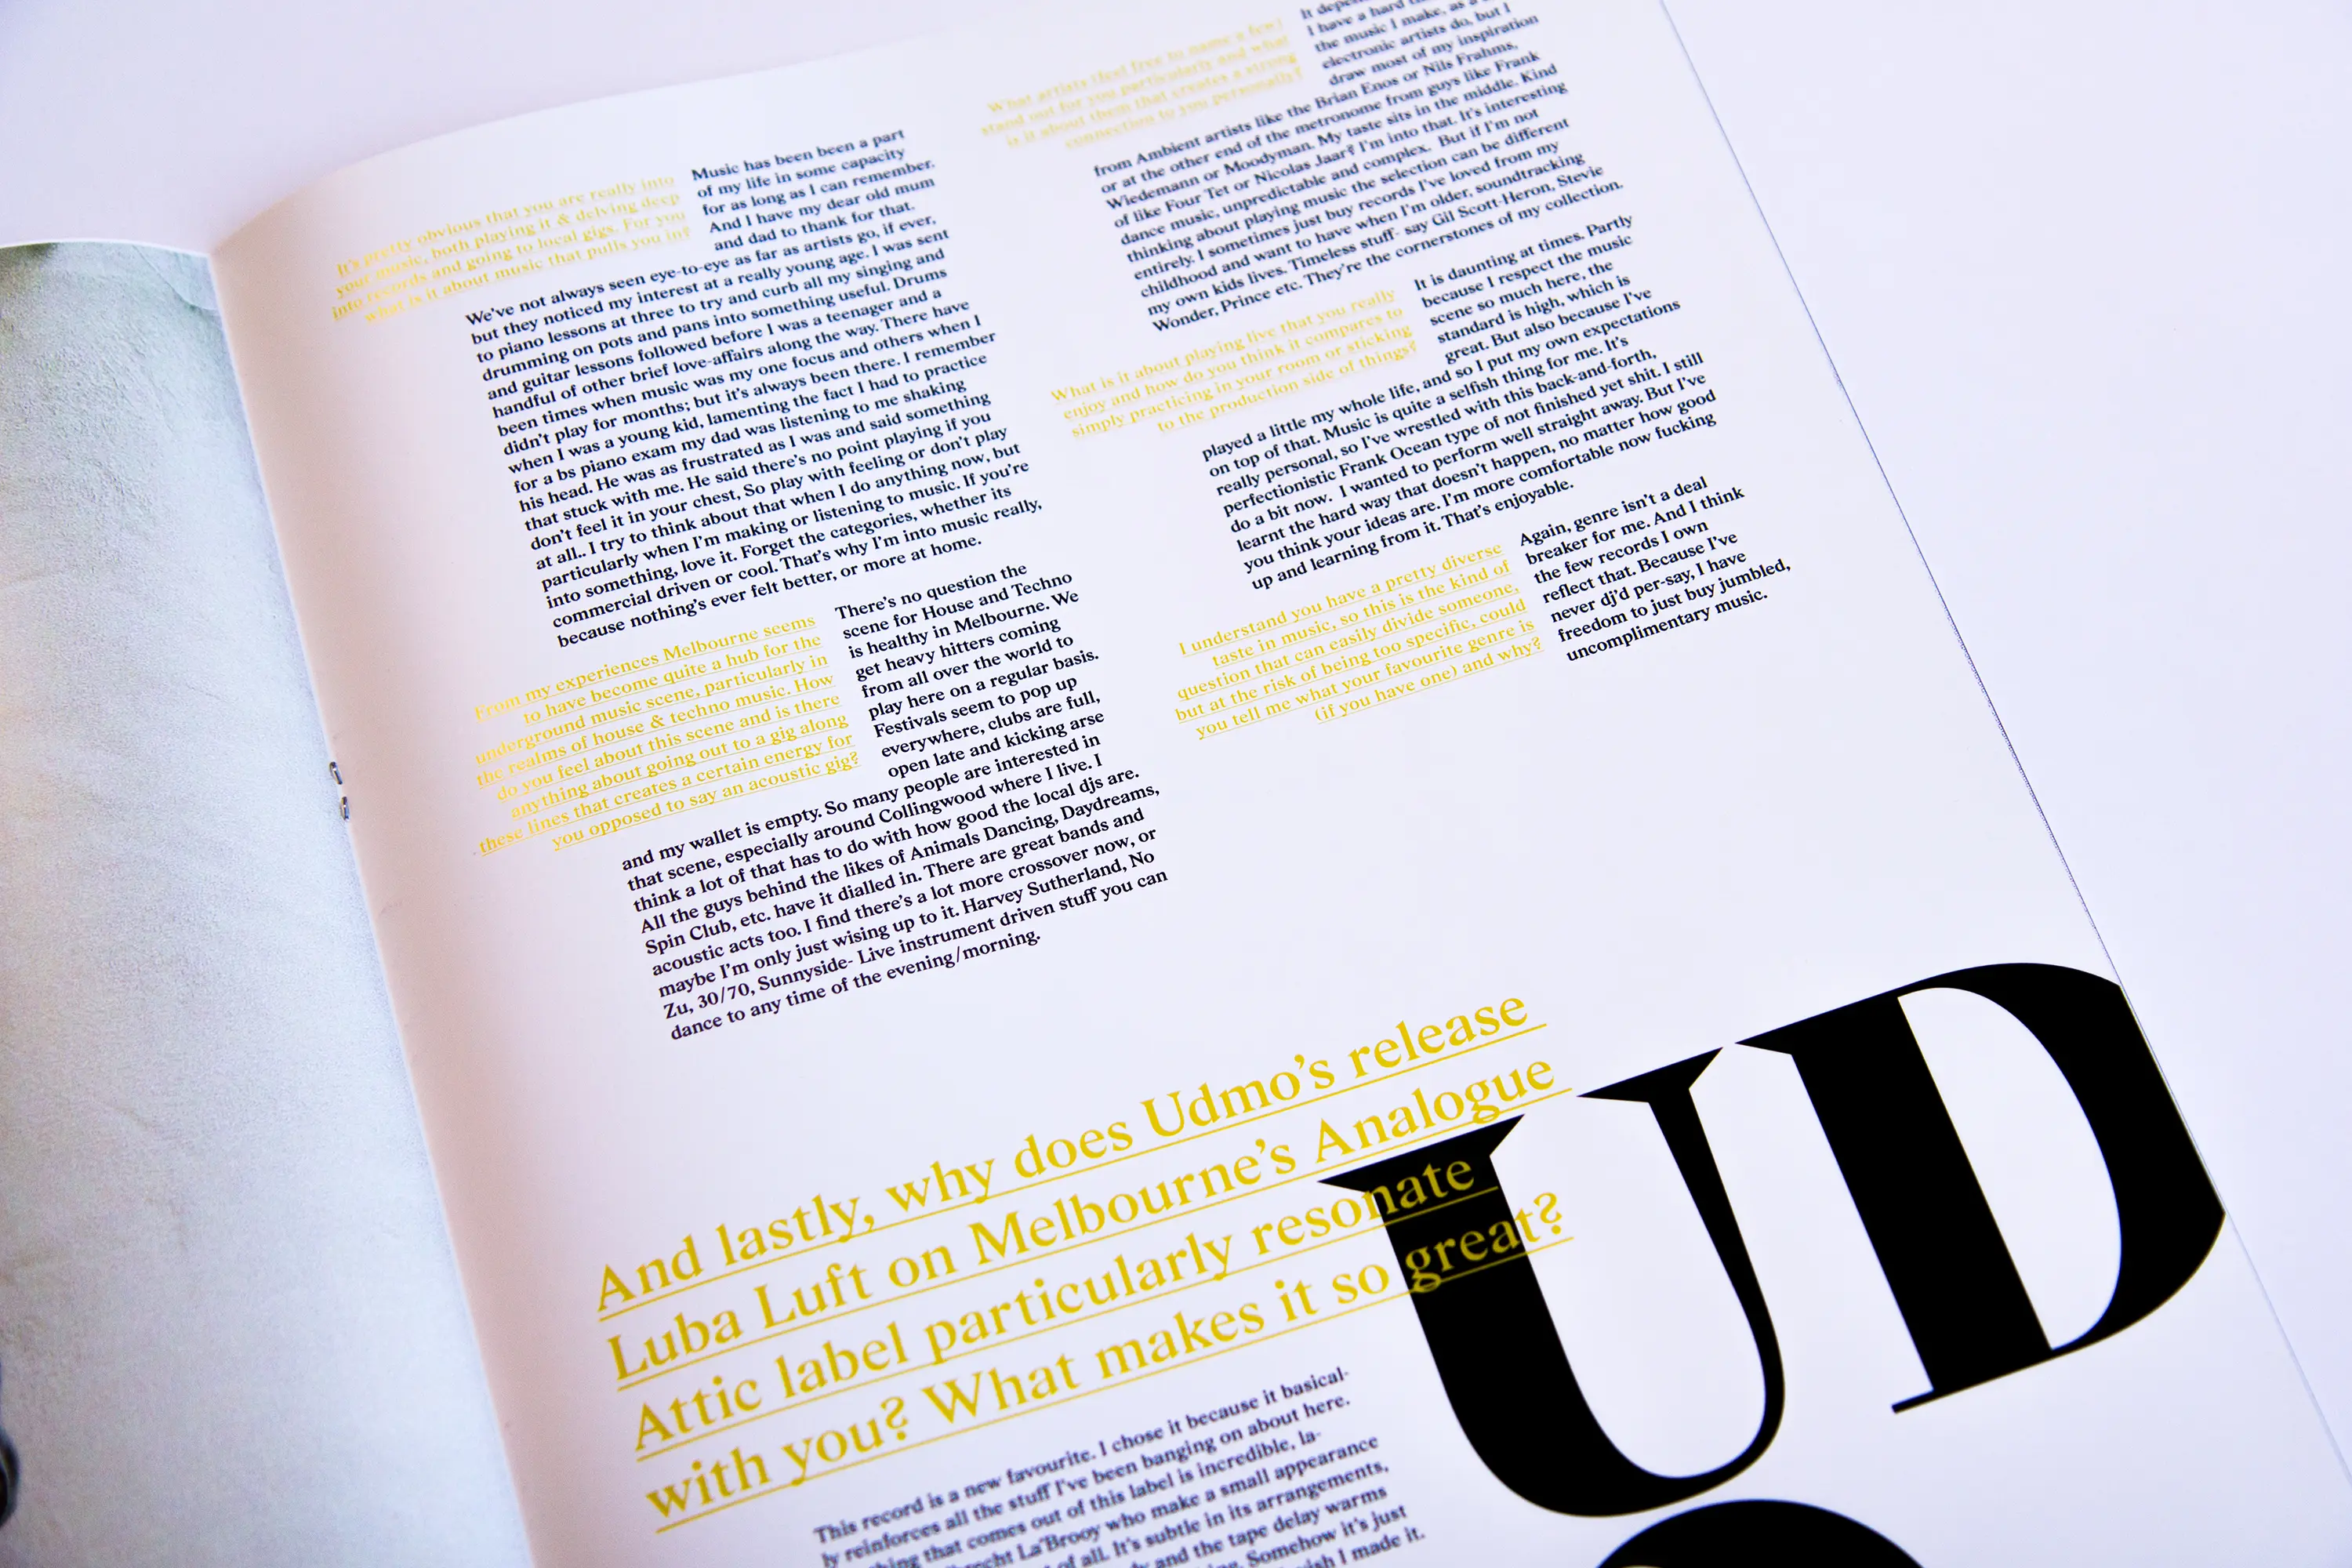 Resonate Magazine - page showing interview typography